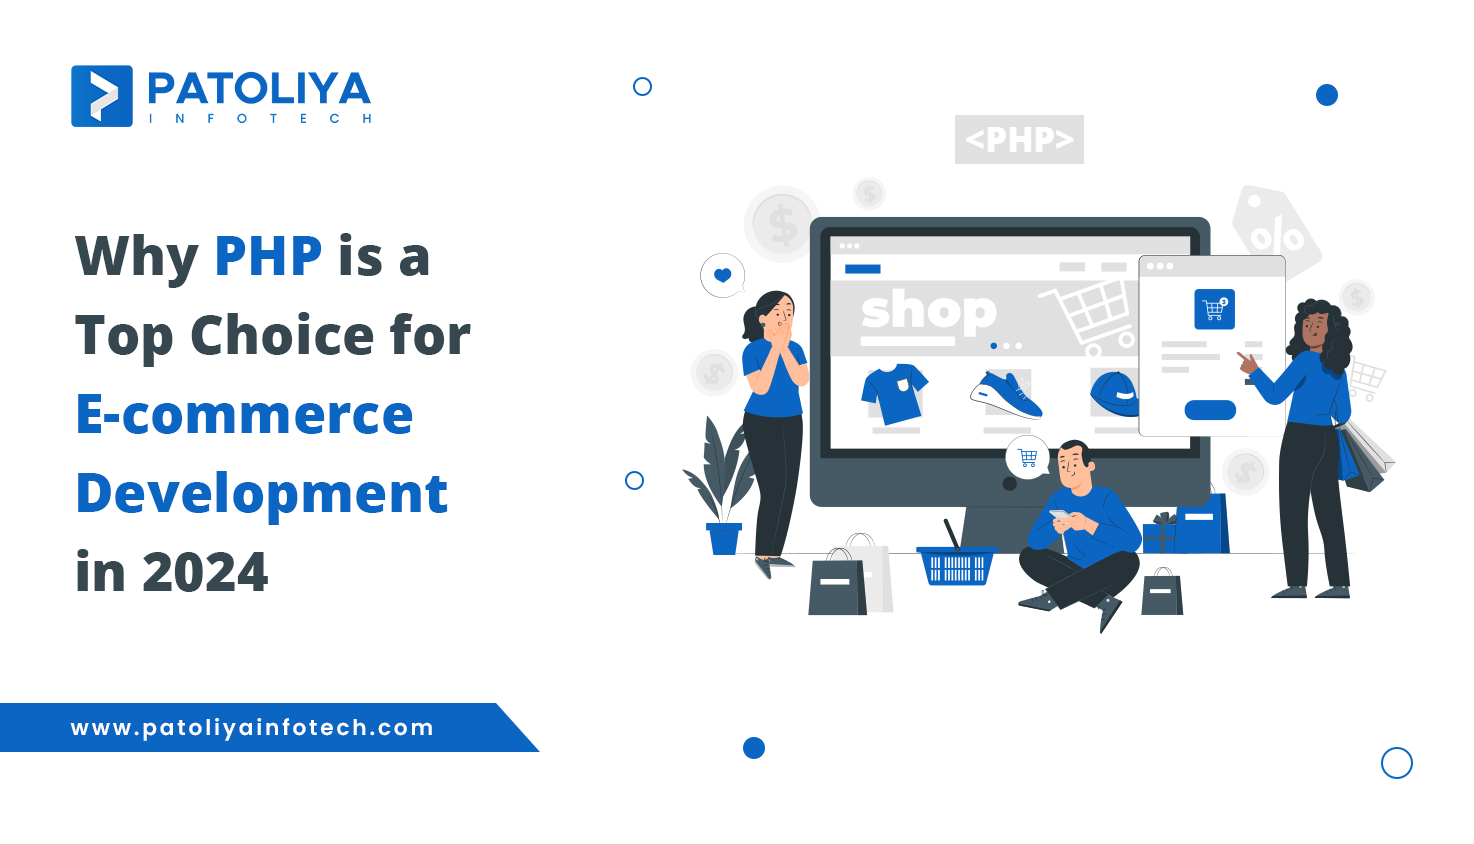 Why PHP is a Top Choice for E-commerce Development in 2024?